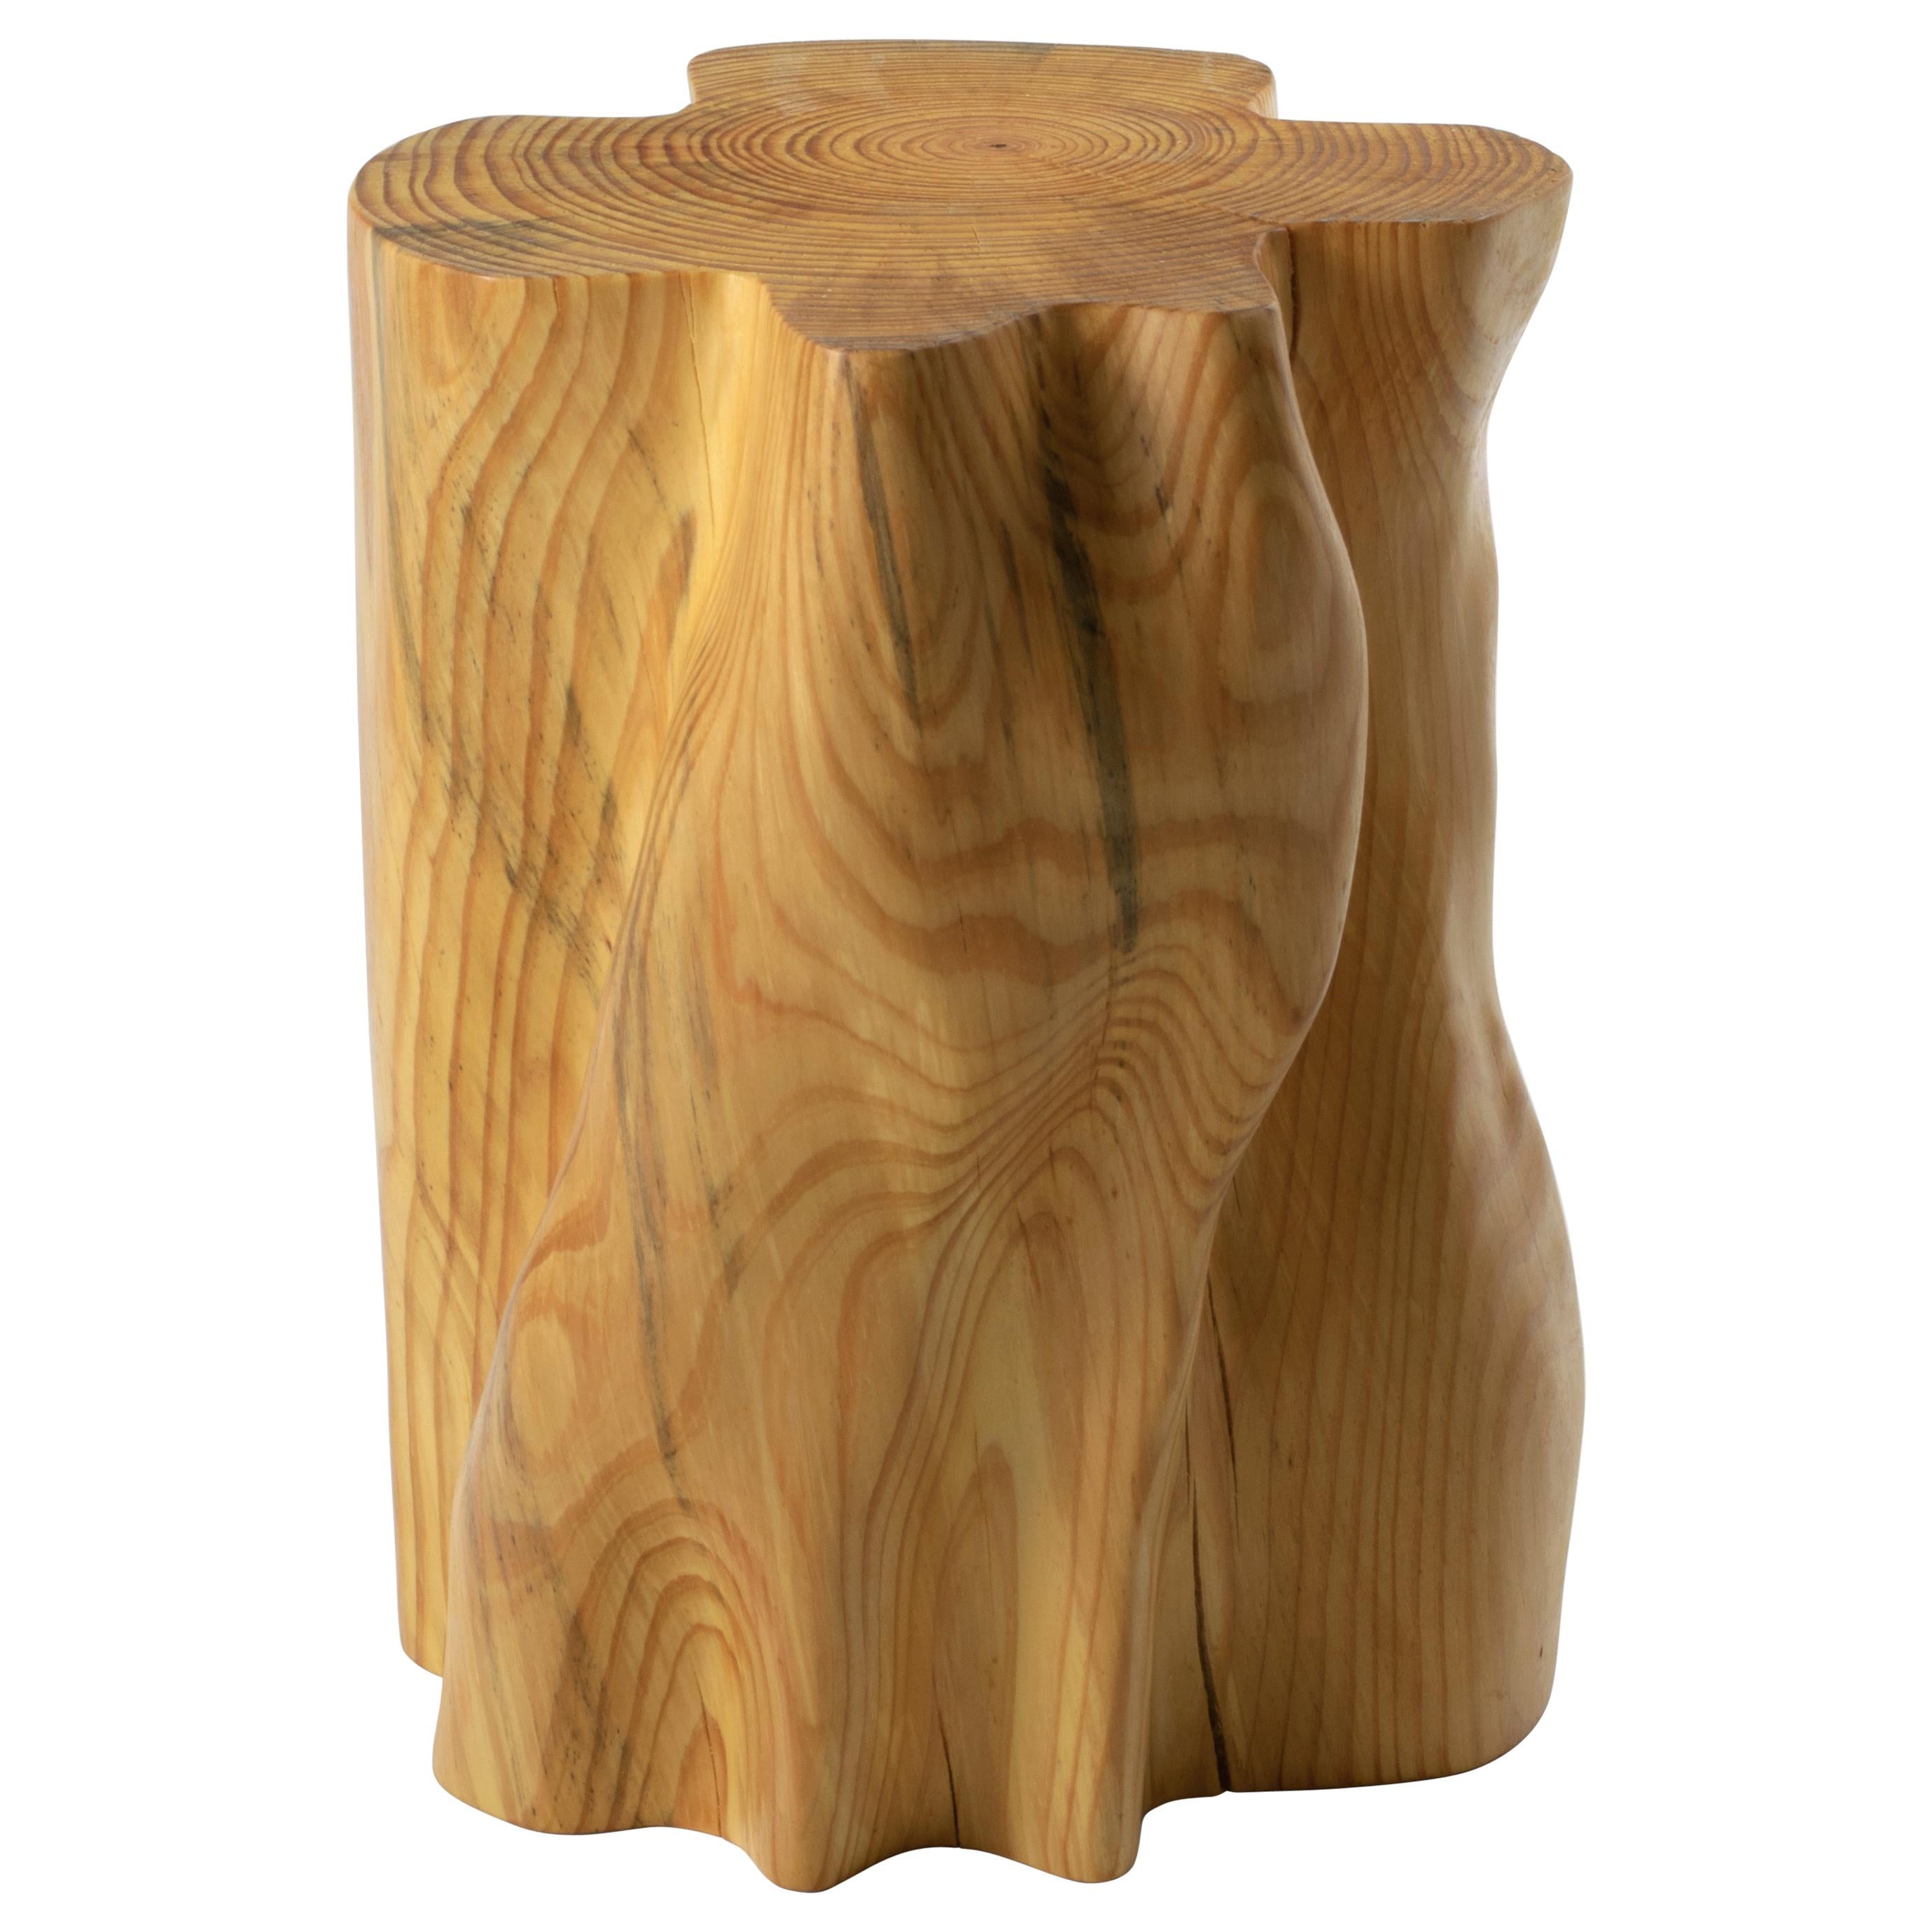 Bark Scale Stool #IV by Timbur, Represented by Tuleste Factory For Sale